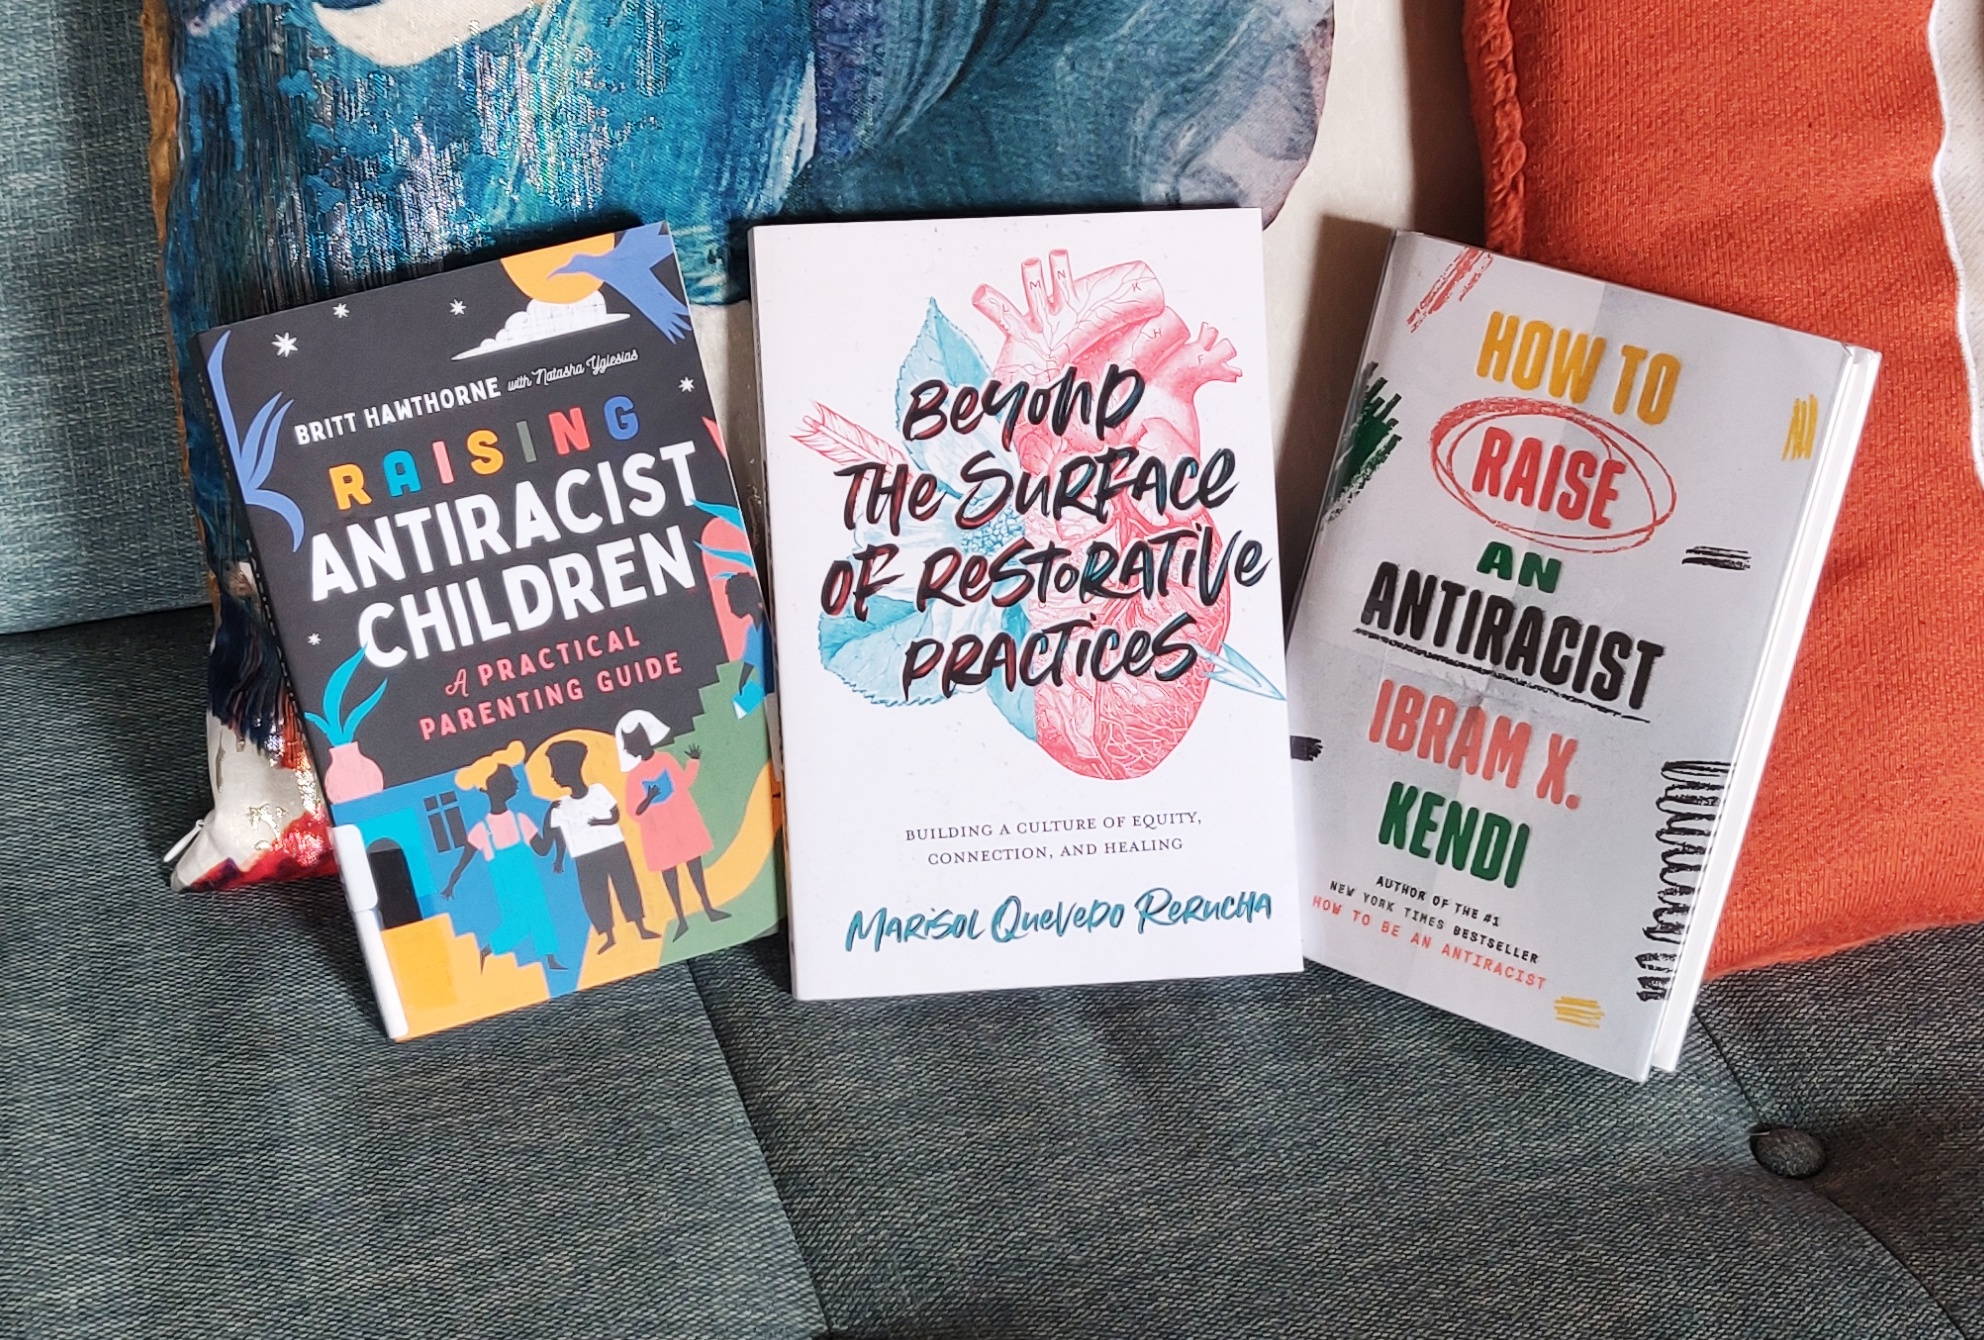 Image of three books on my couch: "Raising Antiracist Children: A Practical Parenting Guide" (Hawthorne & Yglesias), "How to Raise an Antiracist" (Kendi), and "Beyond the Surface of Restorative Practices: Building a Culture of Equity, Connection, and Healing" (Rerucha).